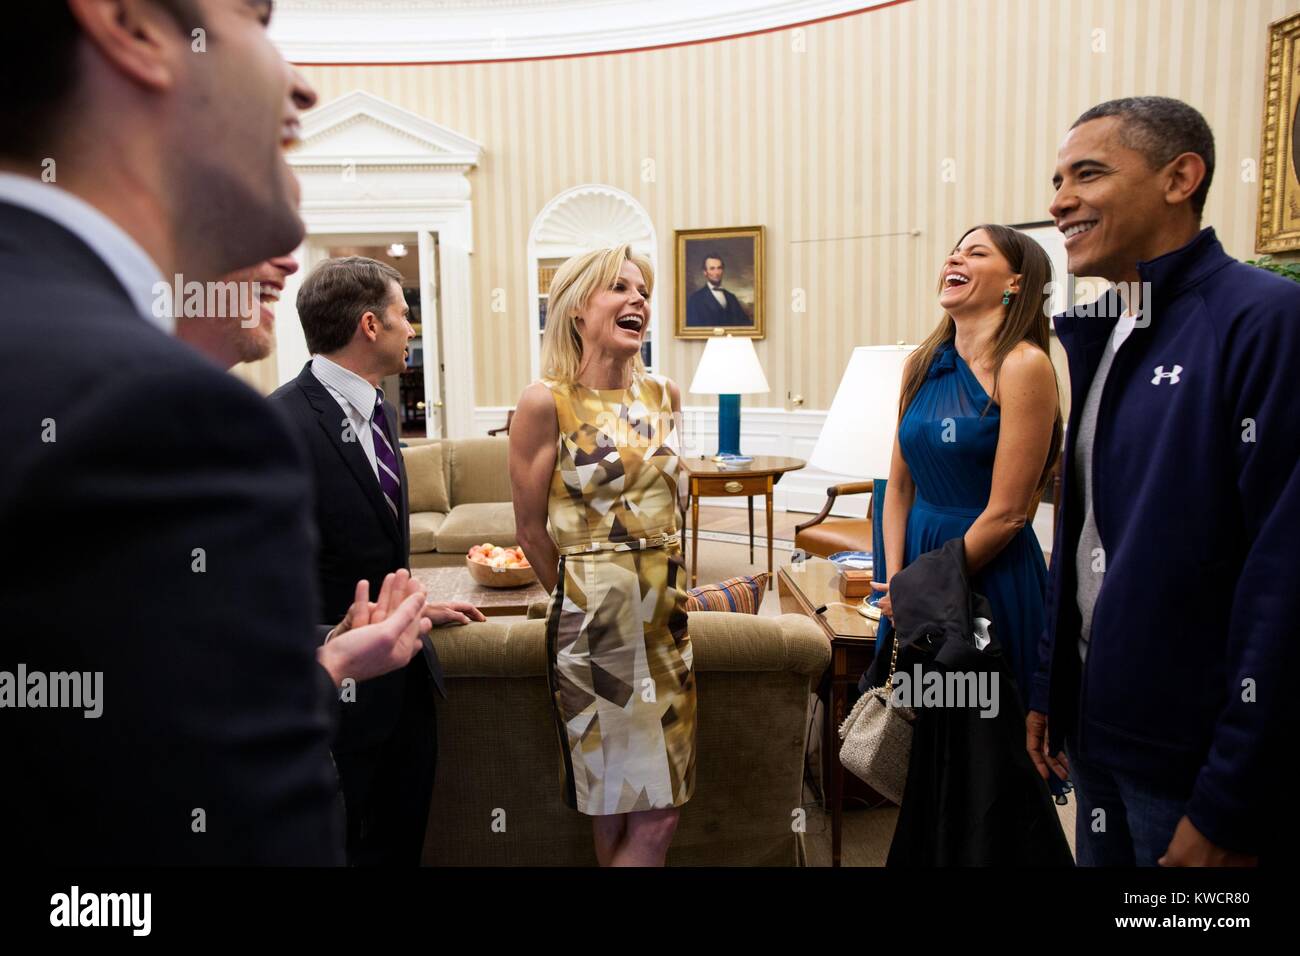 President Barack Obama greets cast members from ABC's sitcom 'Modern Family'. The group, including Julie Bowen and Sofia Vergara (right), were attending the White House Correspondents' Dinner. April 28, 2012 (BSLOC 2015 3 117) Stock Photo